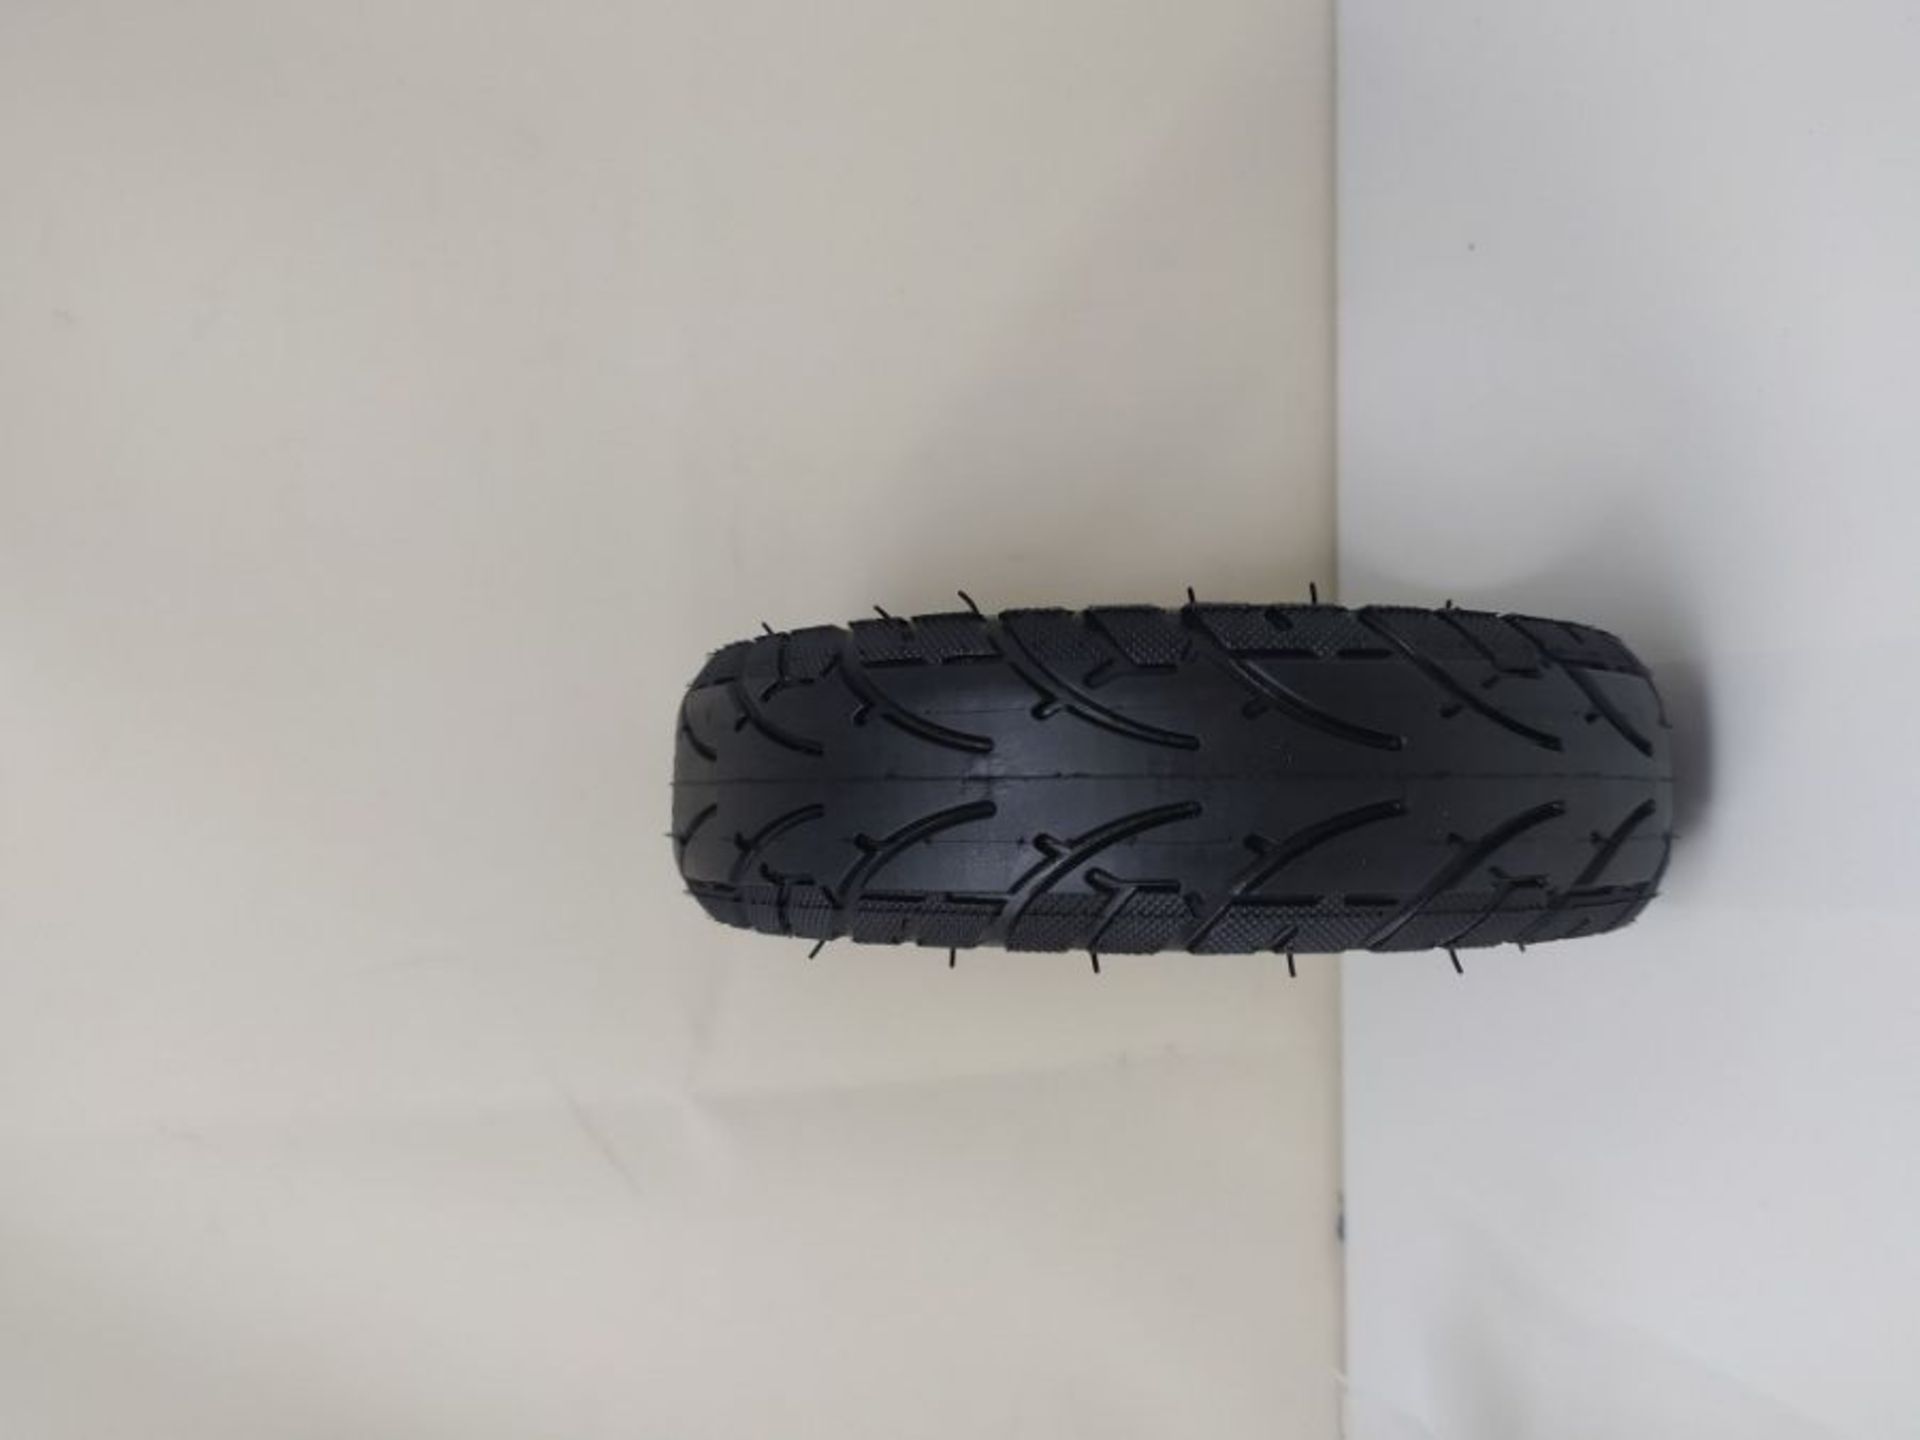 wingsmoto 8 x 2.00-5 Tubeless Tire Tyre for Electric Scooter 8 Inch E Scooter Universa - Image 2 of 2